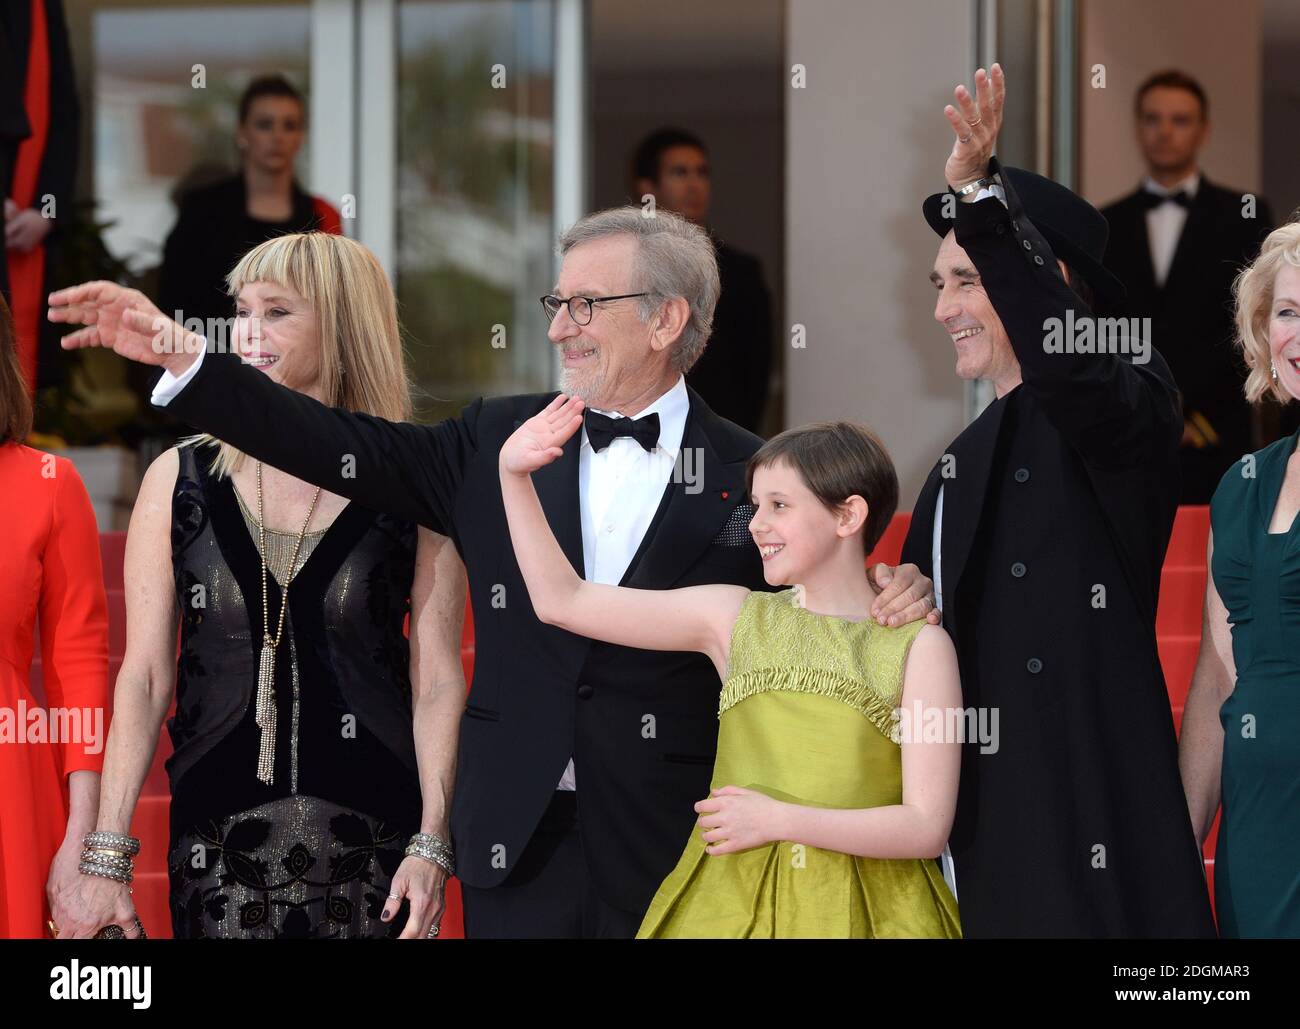 Steven Spielberg, Ruby Barnhill and Mark Rylance attending The BFG premiere, held at the Palais De Festival. Part of the 69th Cannes Film Festival in France. Stock Photo